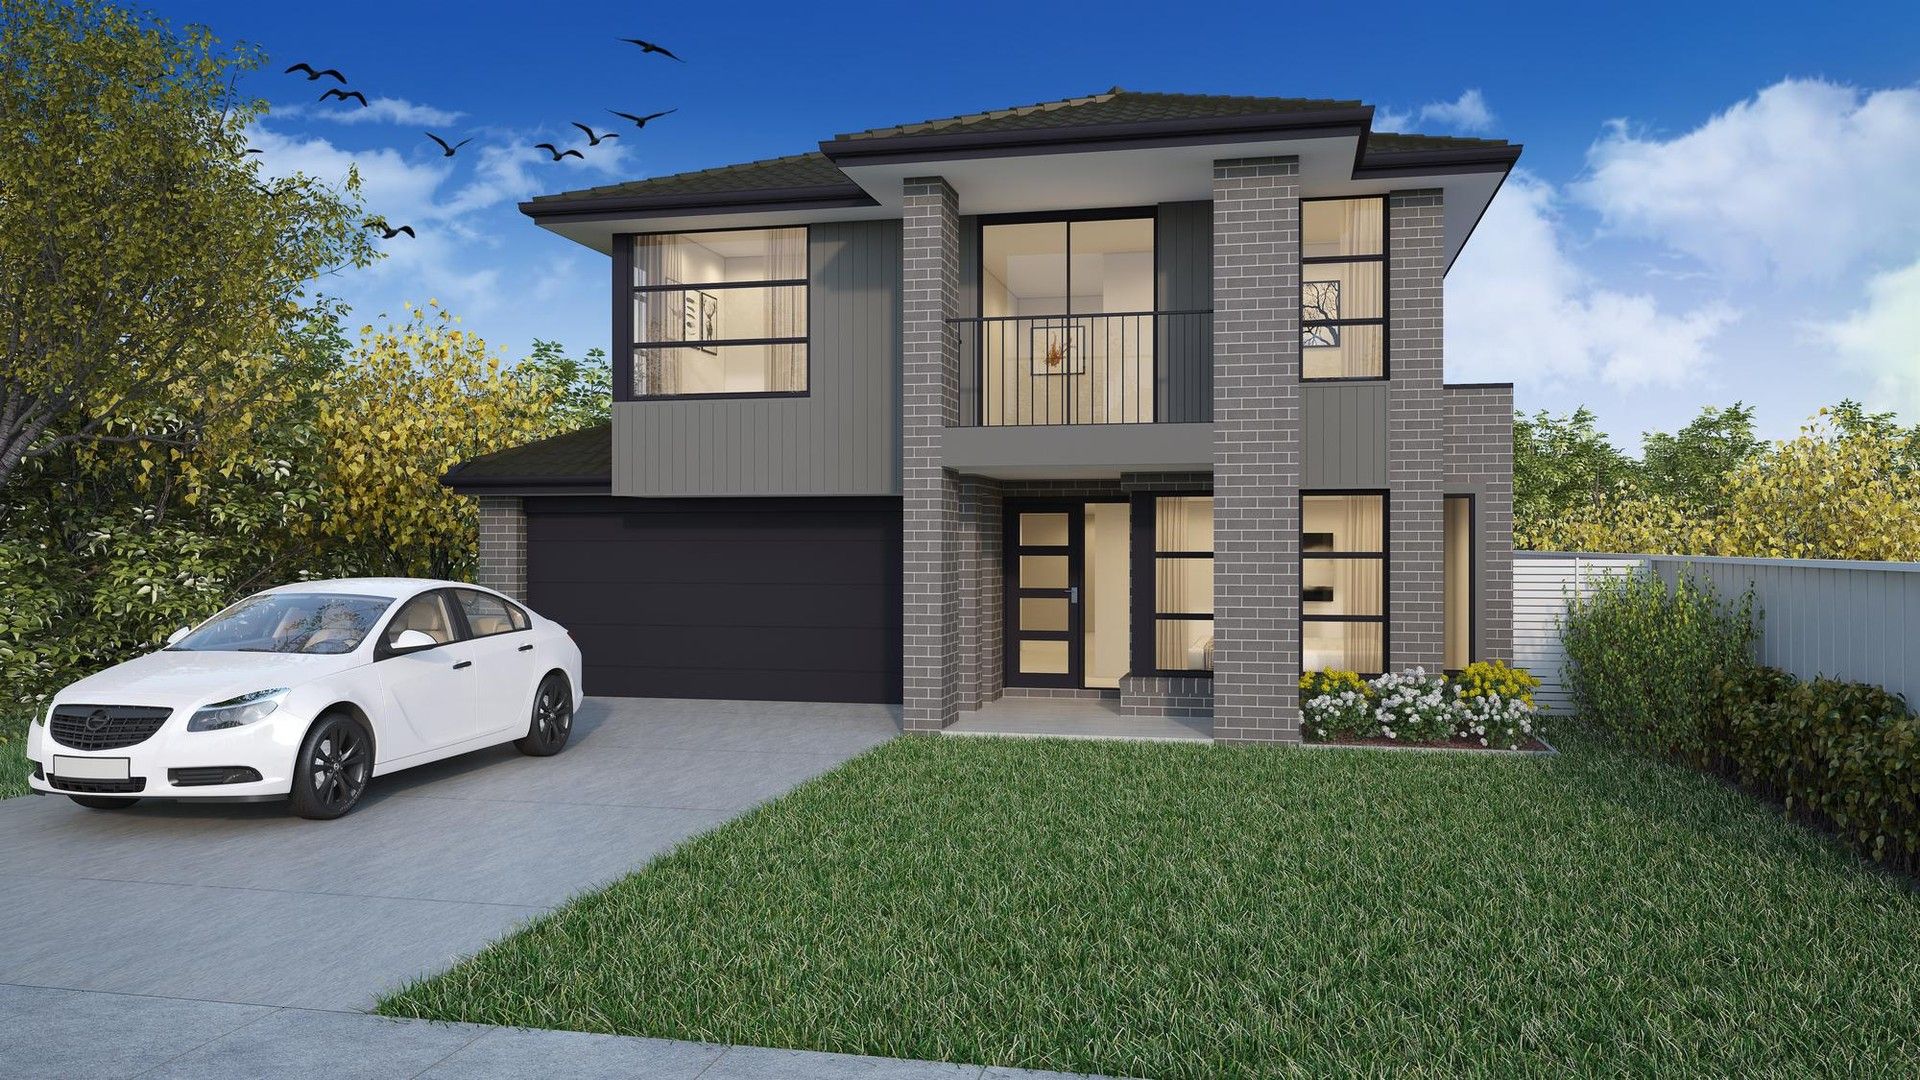 4 bedrooms New House & Land in 110 Warralily (The Grange) Estate ARMSTRONG CREEK VIC, 3217